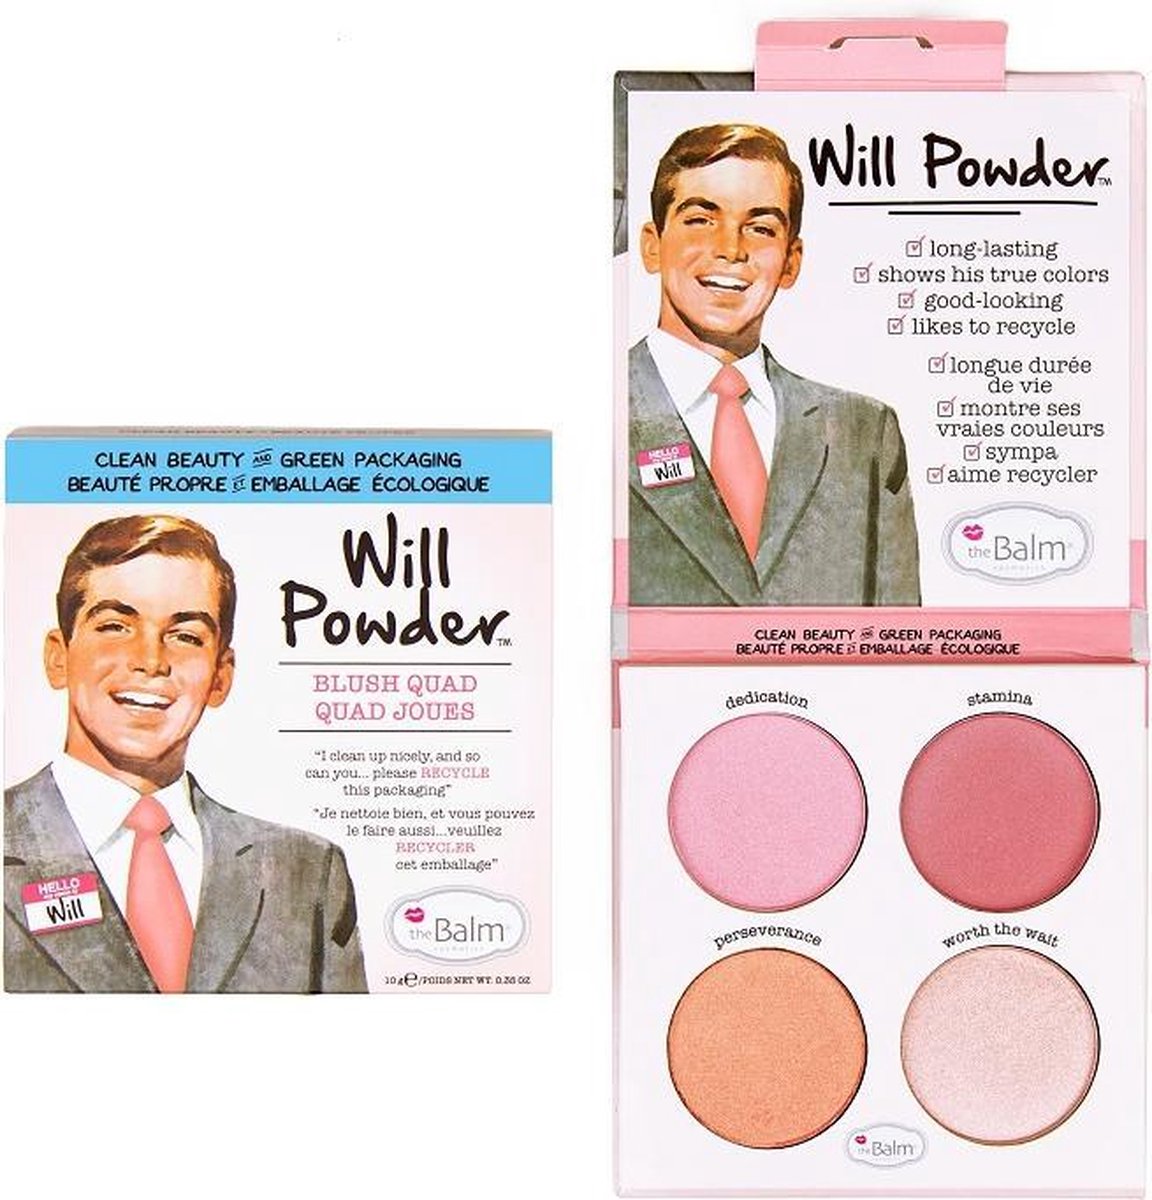 The Balm - Will Powder Blush Quad Palette Of Gowns To Cheeks 10G